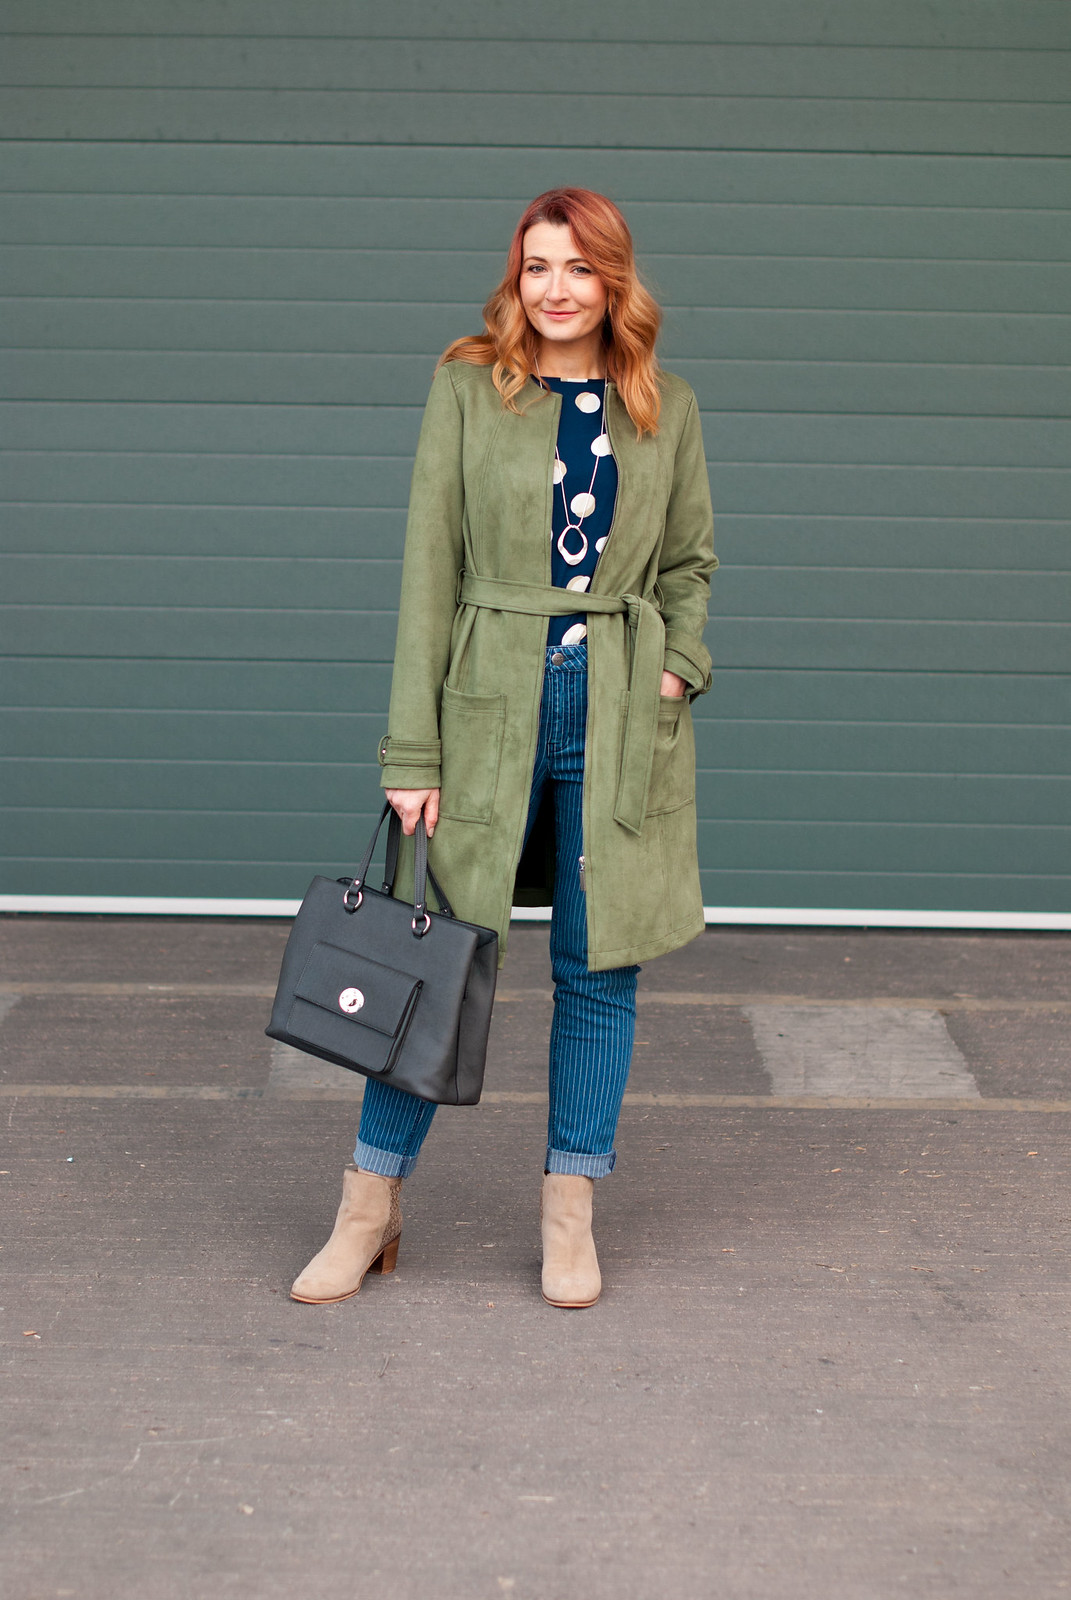 Winter to spring transitional outfit - khaki green suede jacket, spotty top, pinstripe boyfriend jeans, stone ankle boots | Not Dressed As Lamb, over 40 style